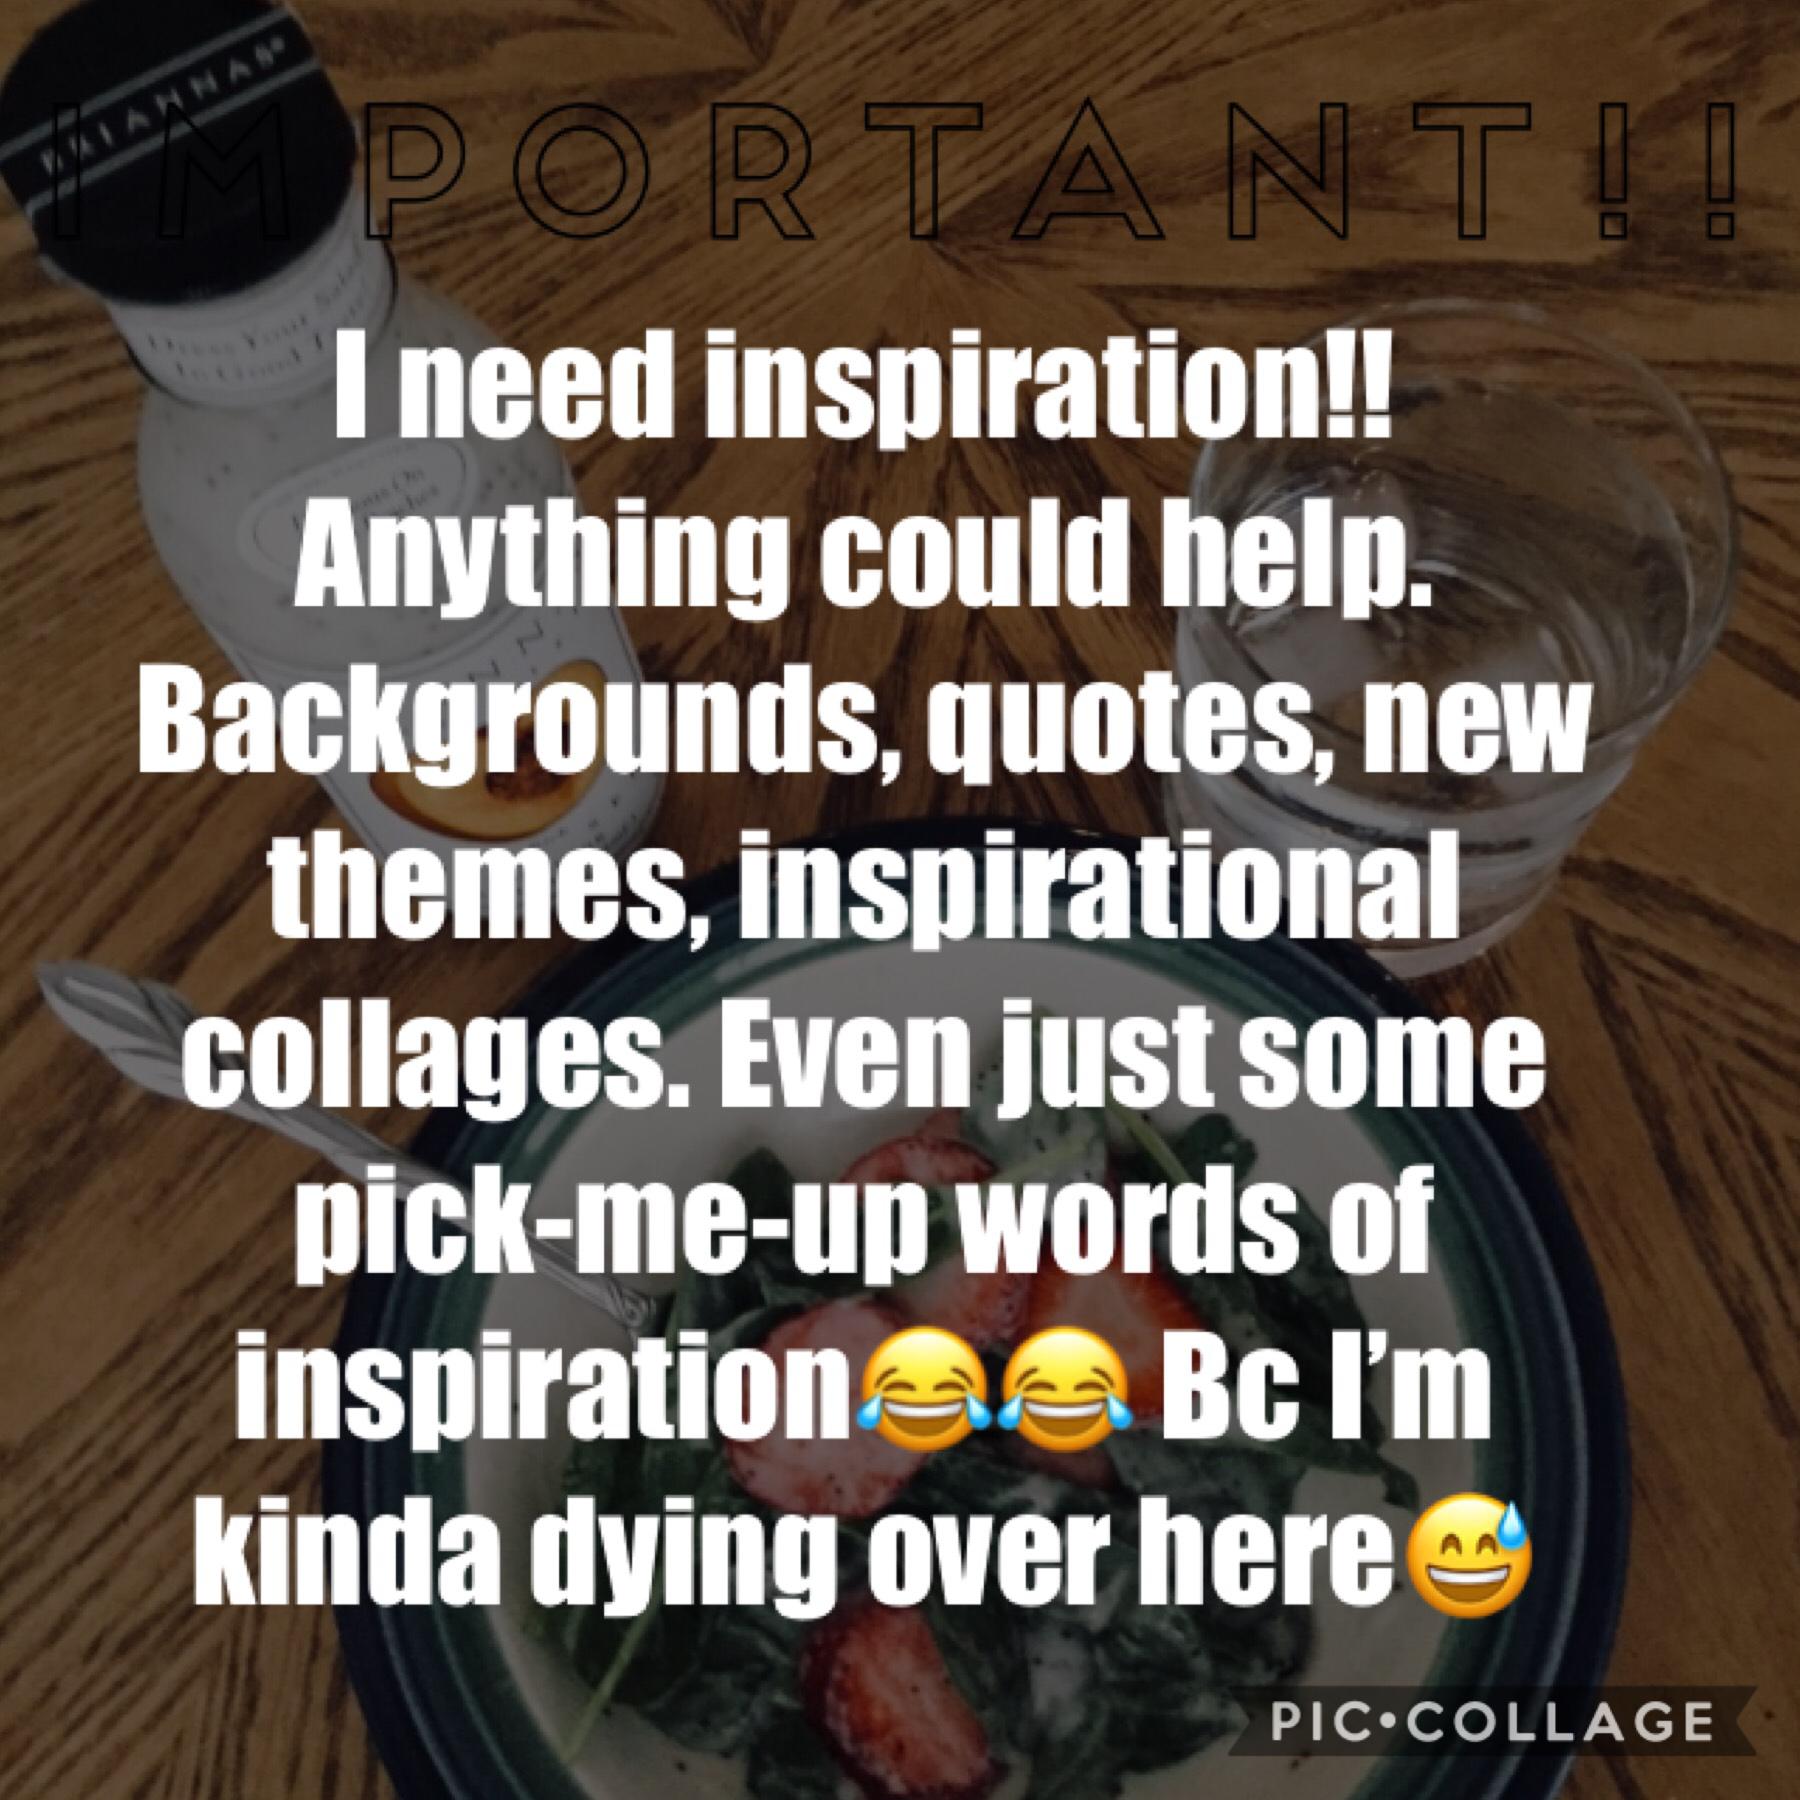 Tappity Tap Tap🙊
No joke, ANYTHING could help. I’m not motivated to make collages anymore. I need some serious inspiration. I start school Tuesday which means I’m gonna start my inactivity period. I think I’ve become too obsessed w/ PC. It’s becoming unhe